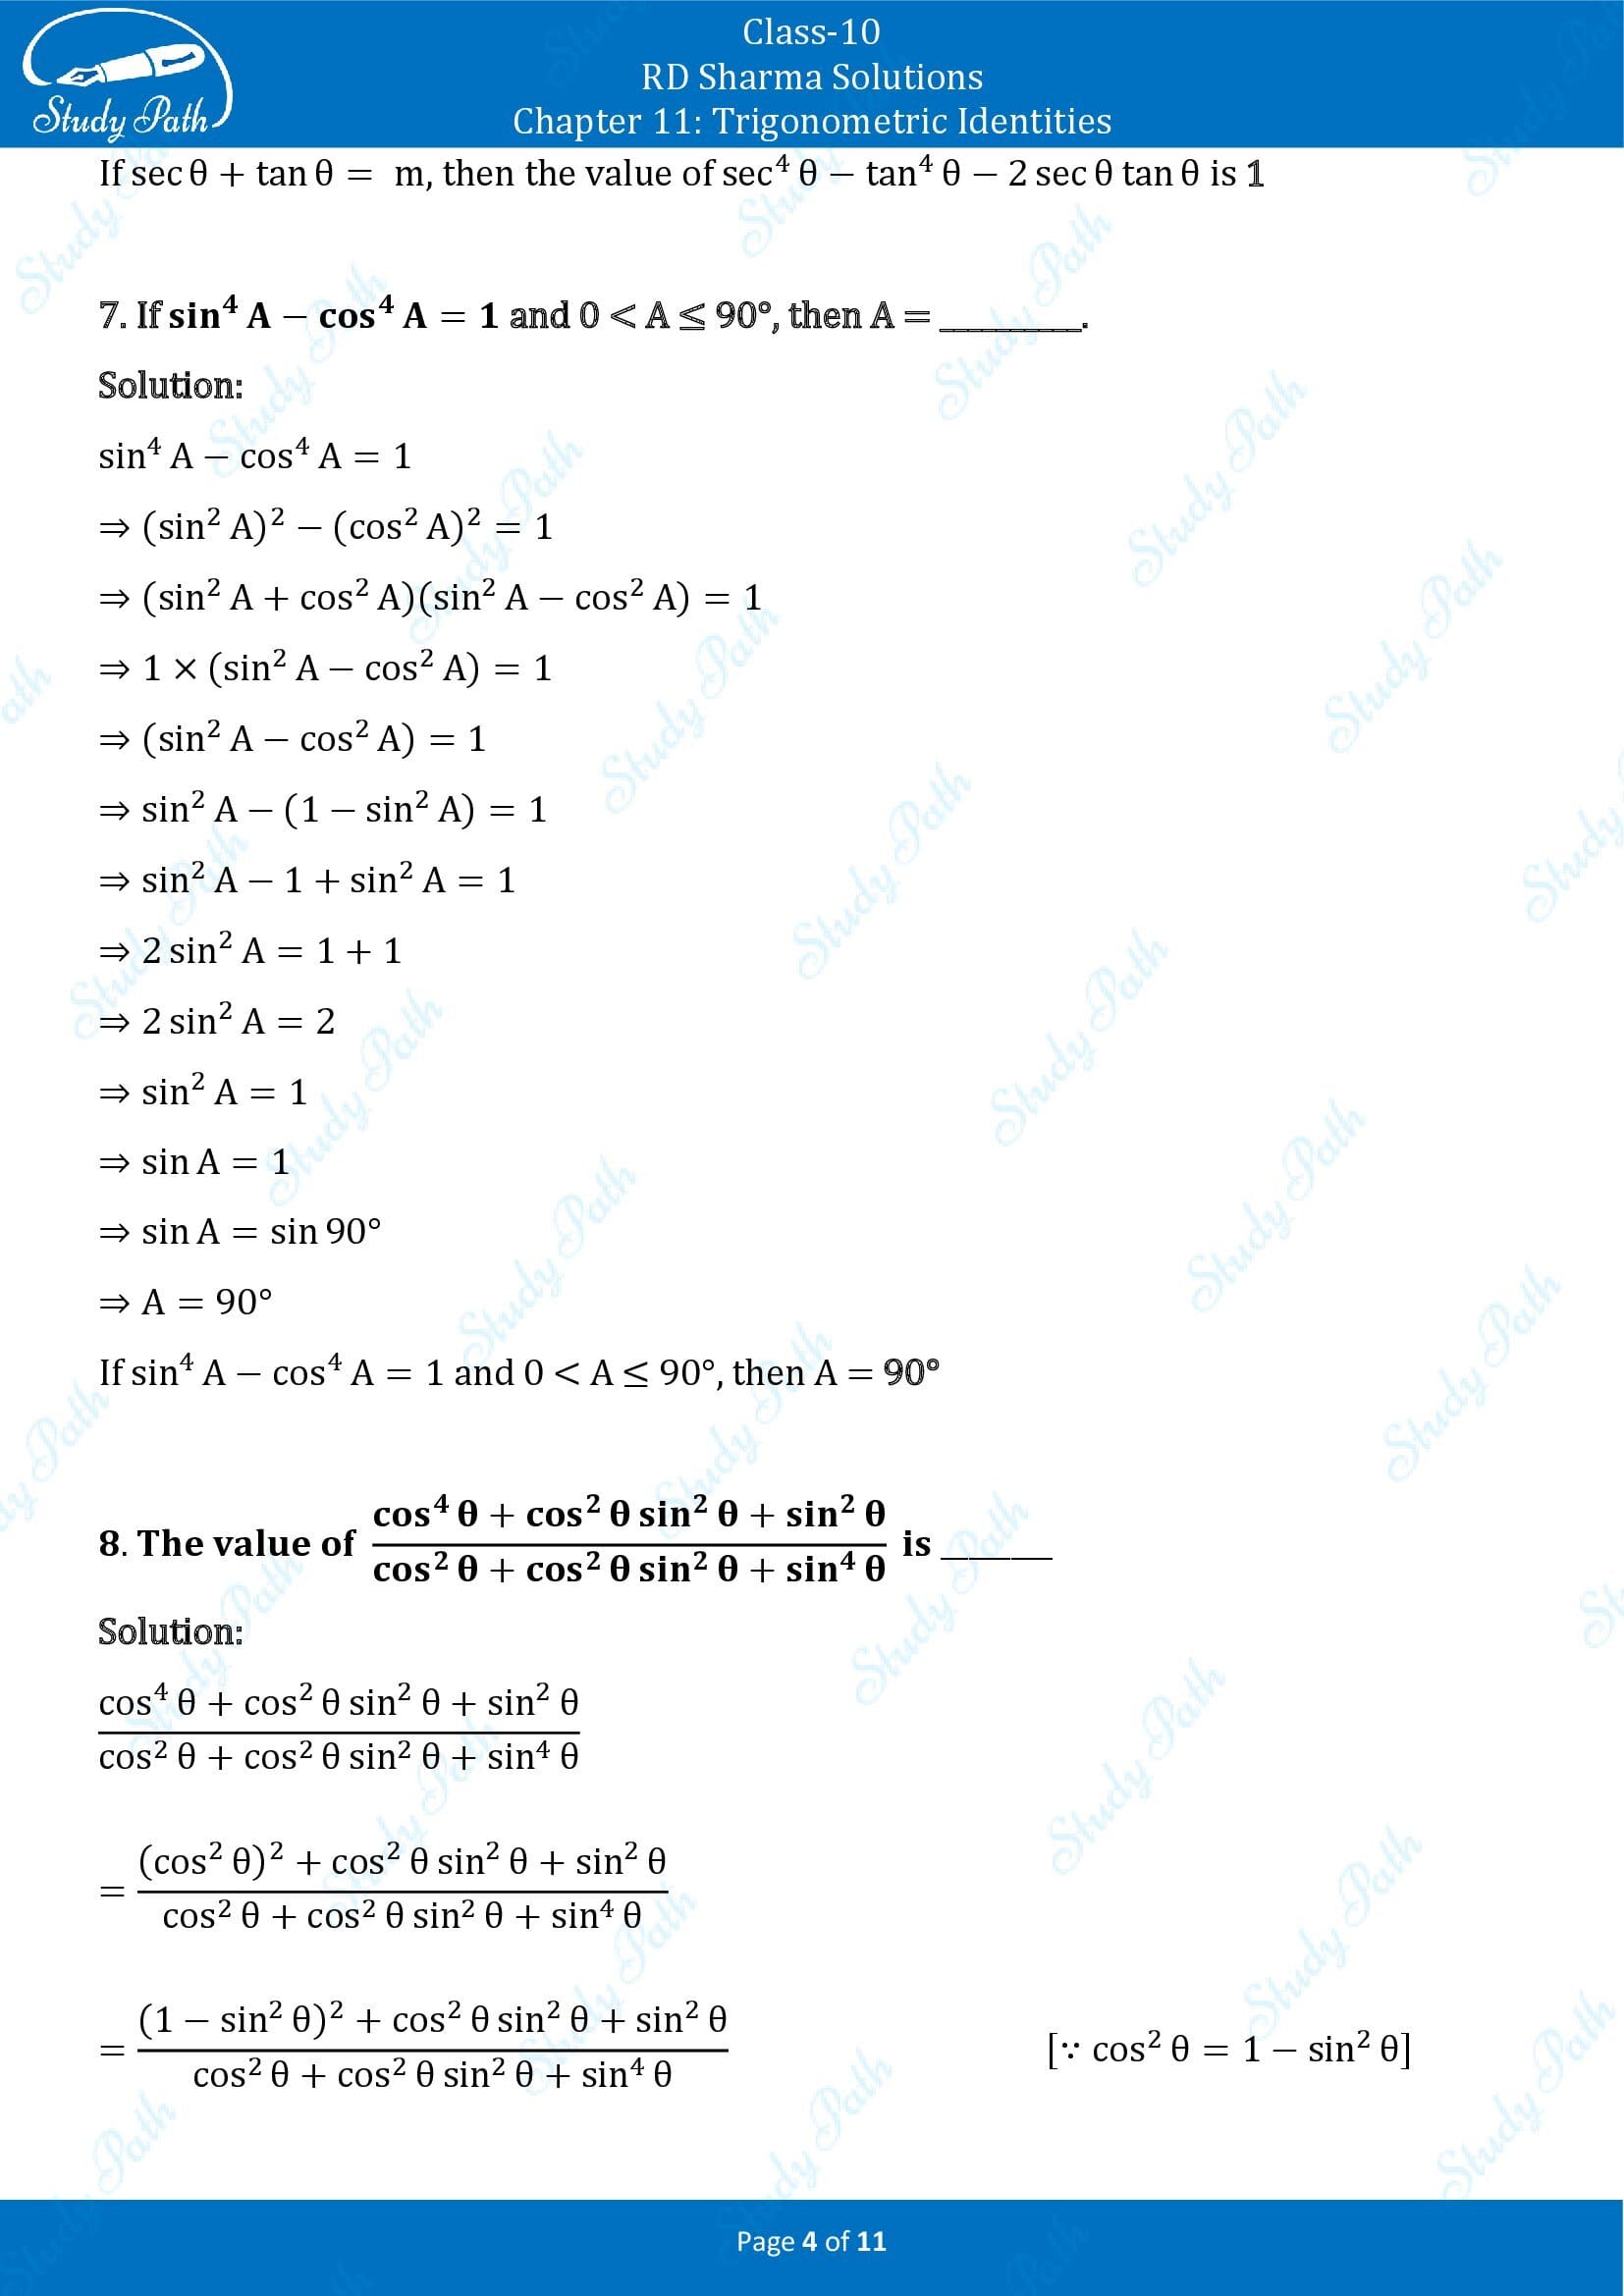 RD Sharma Solutions Class 10 Chapter 11 Trigonometric Identities Fill in the Blank Type Questions FBQs 00004